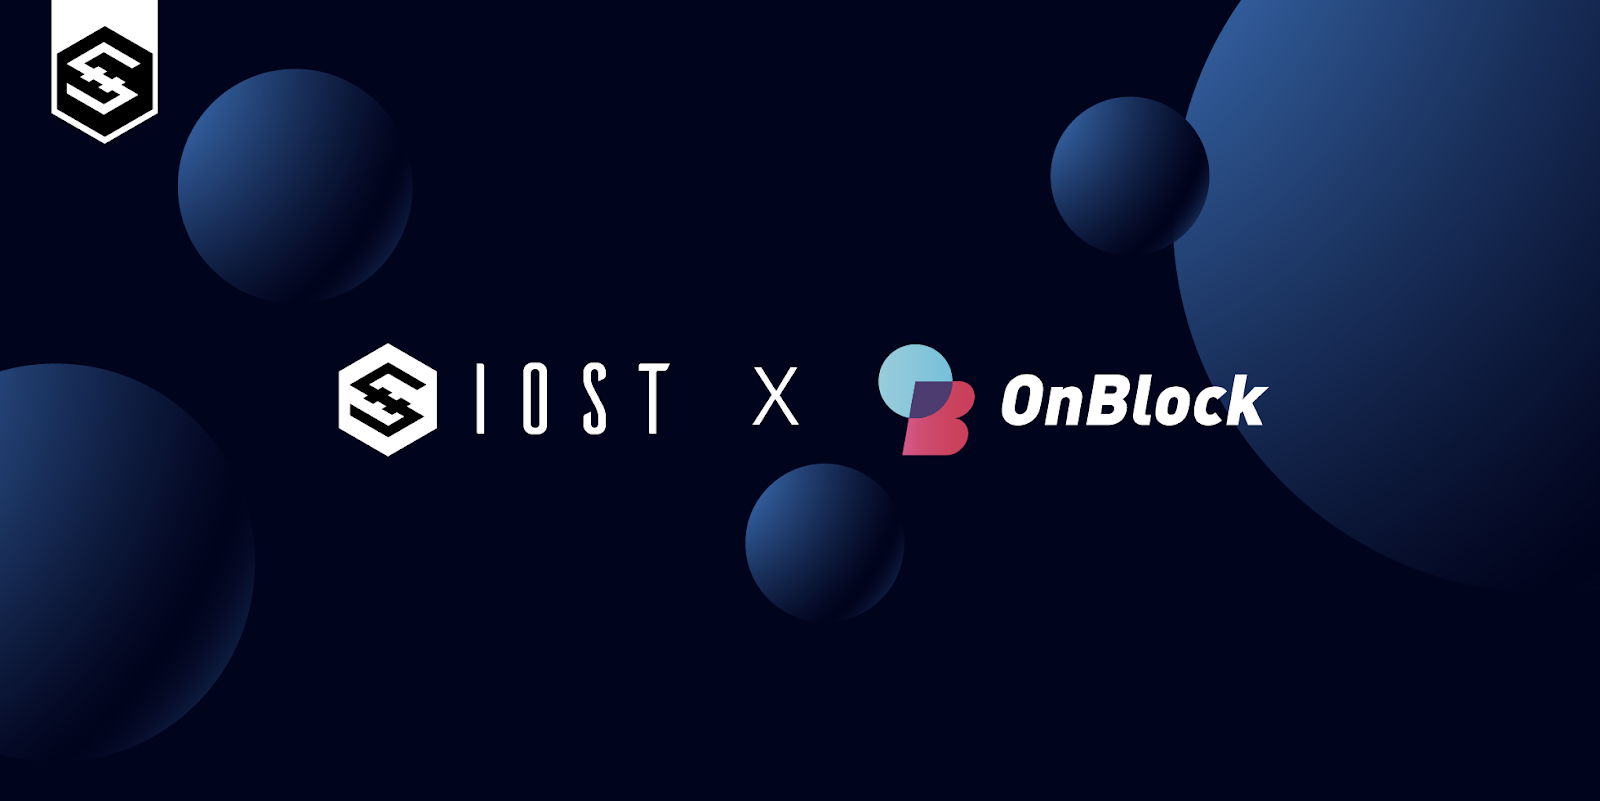 IOST introduces OnBlock to let everyday users interact with on-network
DApps with email, mobile number